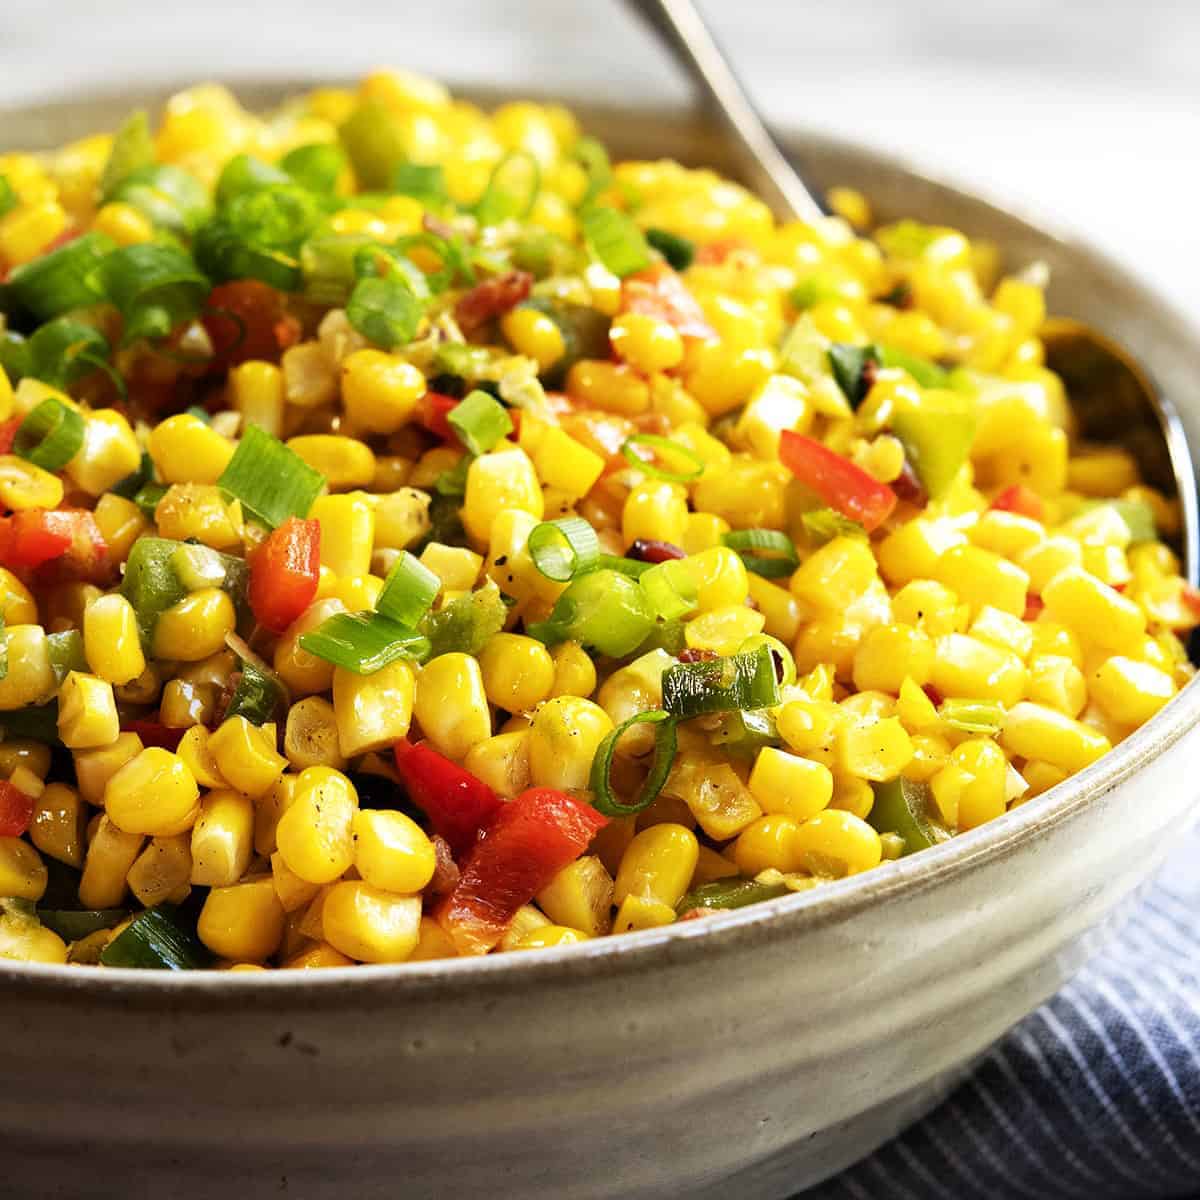 A bowl of corn salad with peppers and onions.